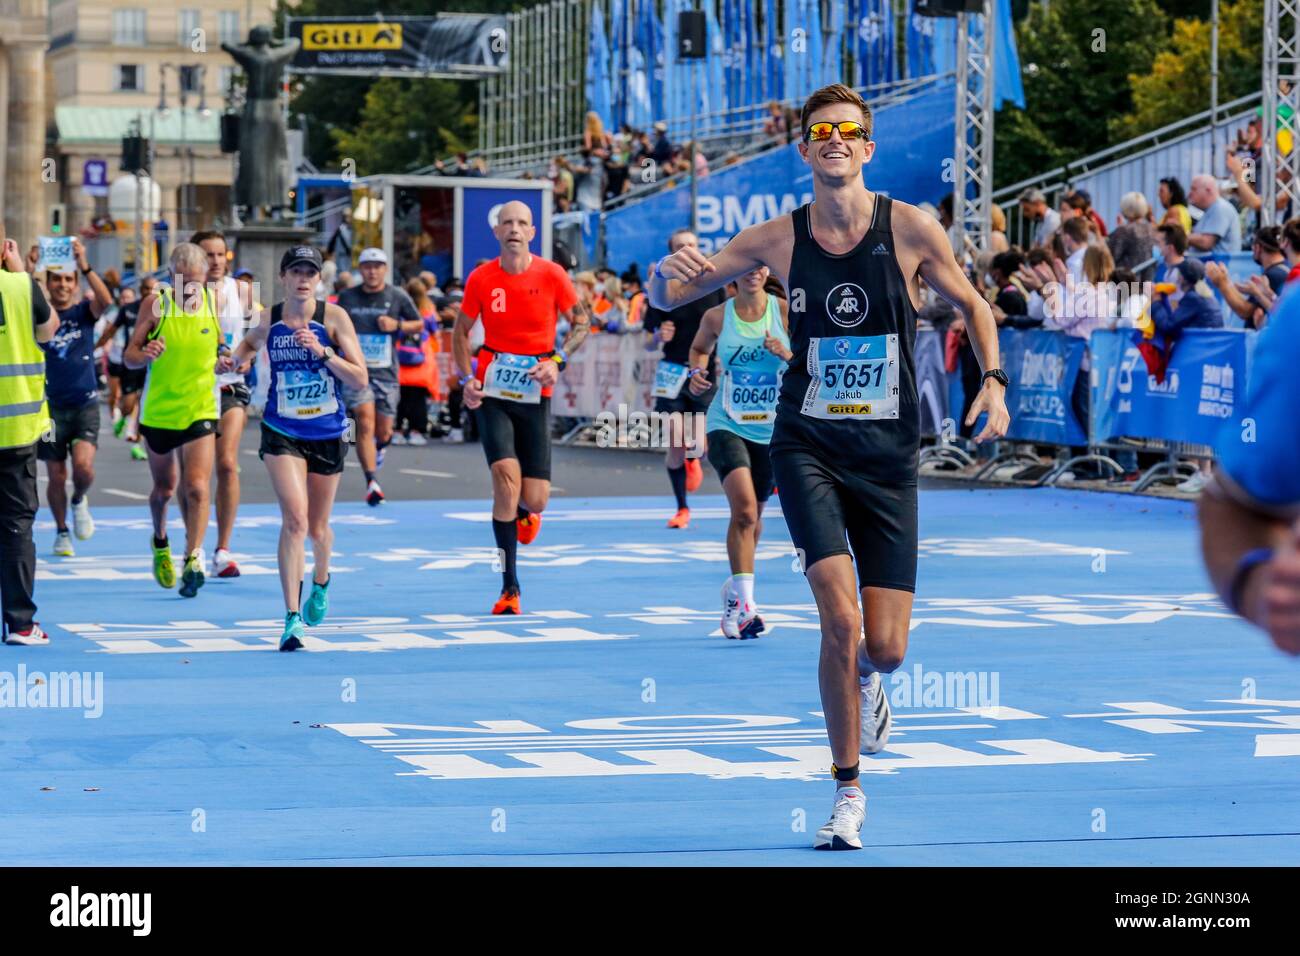 Berlin, Germany. 26th Sep, 2021. Participants run as thousands of people participate in the BMW BERLIN-MARATHON 2021 on September 26, 2021 in Berlin, Germany. The marathon resumed as a mass event after a year gap caused by Coronavirus pandemic, though extra precaution were taken to keep participants and the public safe. (Photo by Dominika Zarzycka/Sipa USA) Credit: Sipa USA/Alamy Live News Stock Photo